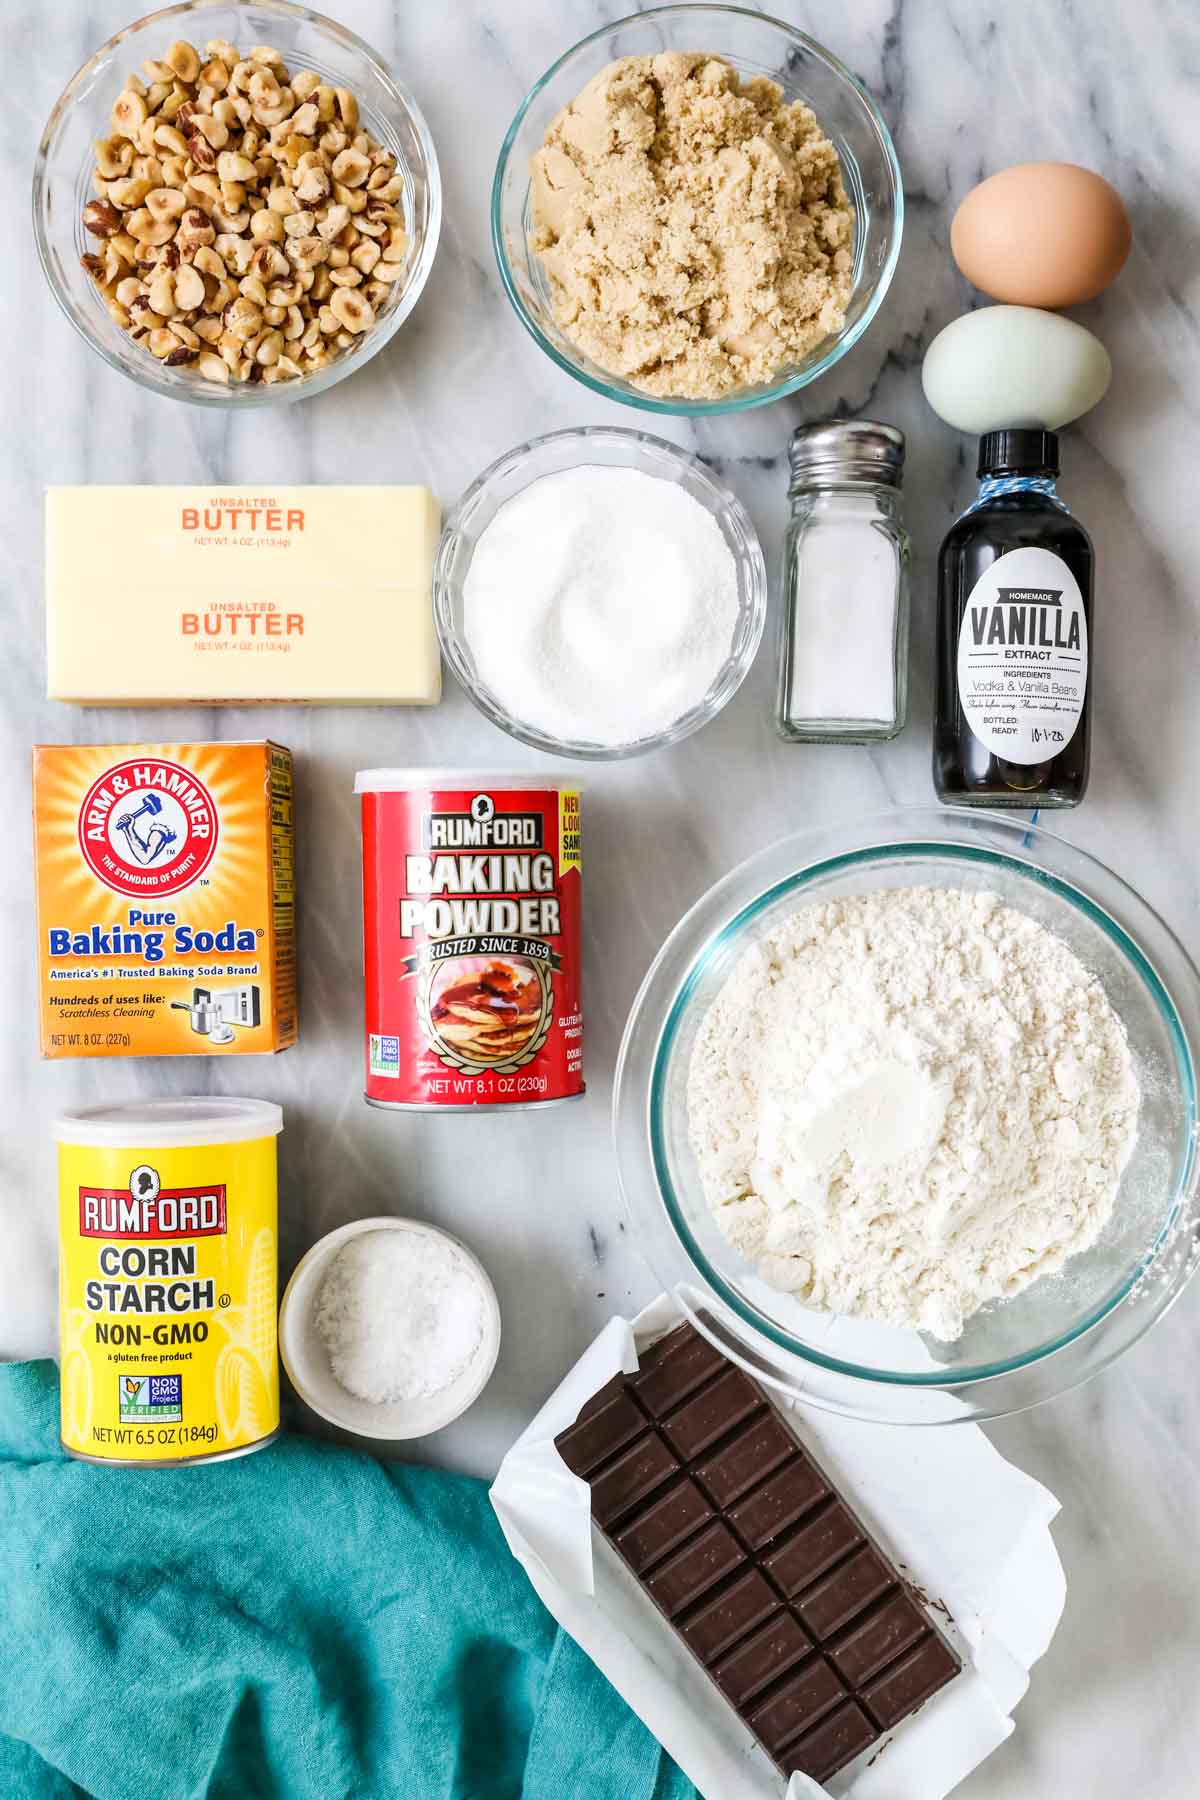 Overhead view of ingredients including hazelnuts, butter, flour, chocolate, and more.